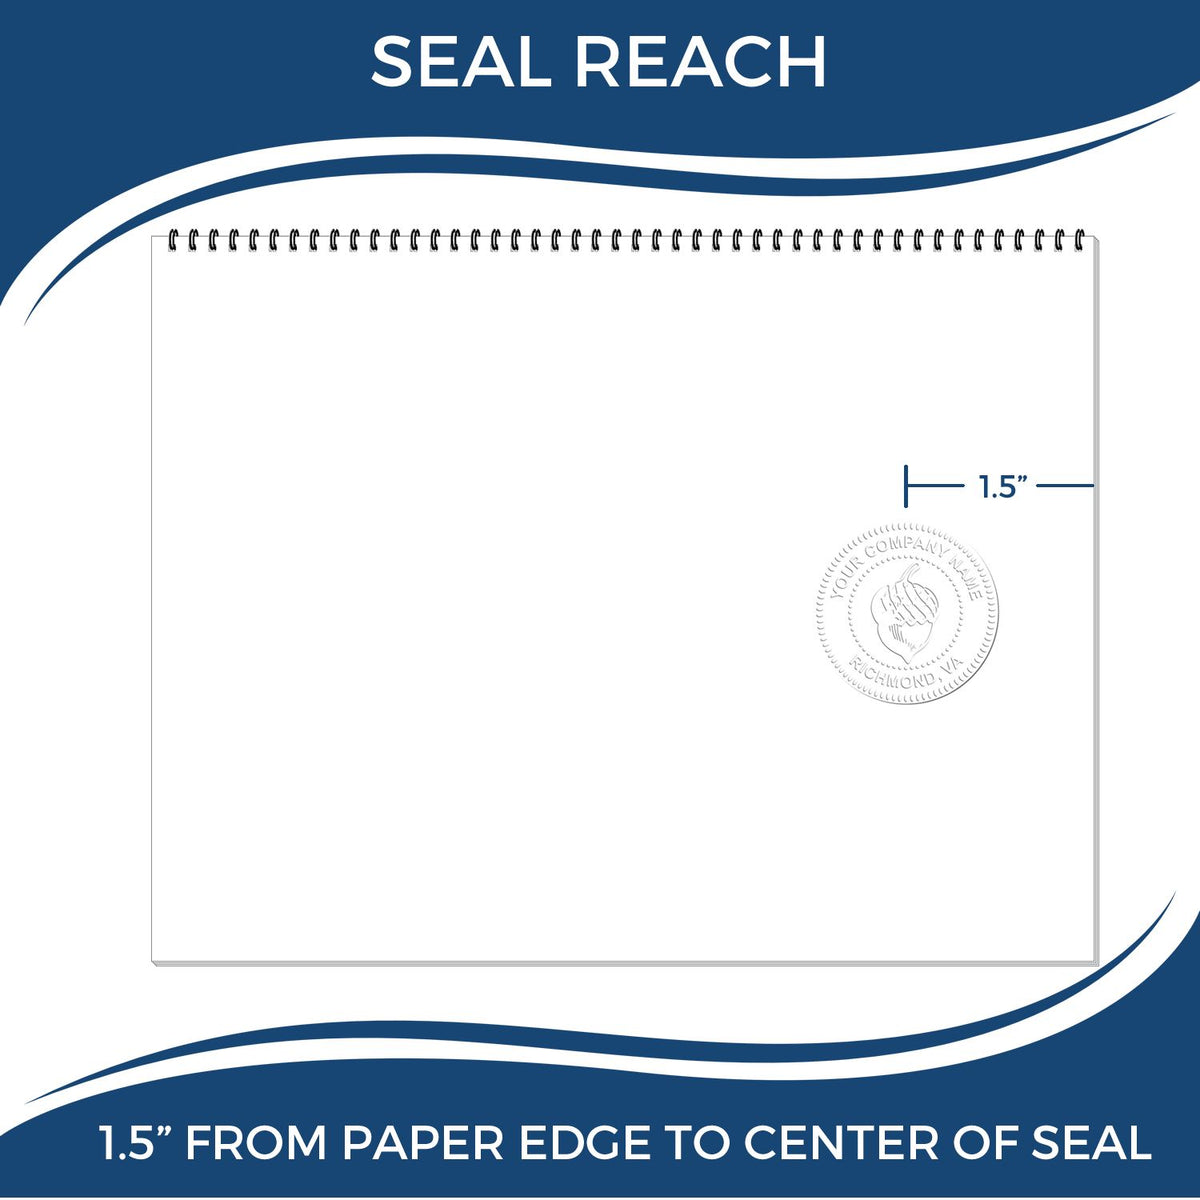 An infographic showing the seal reach which is represented by a ruler and a miniature seal image of the District of Columbia Desk Surveyor Seal Embosser